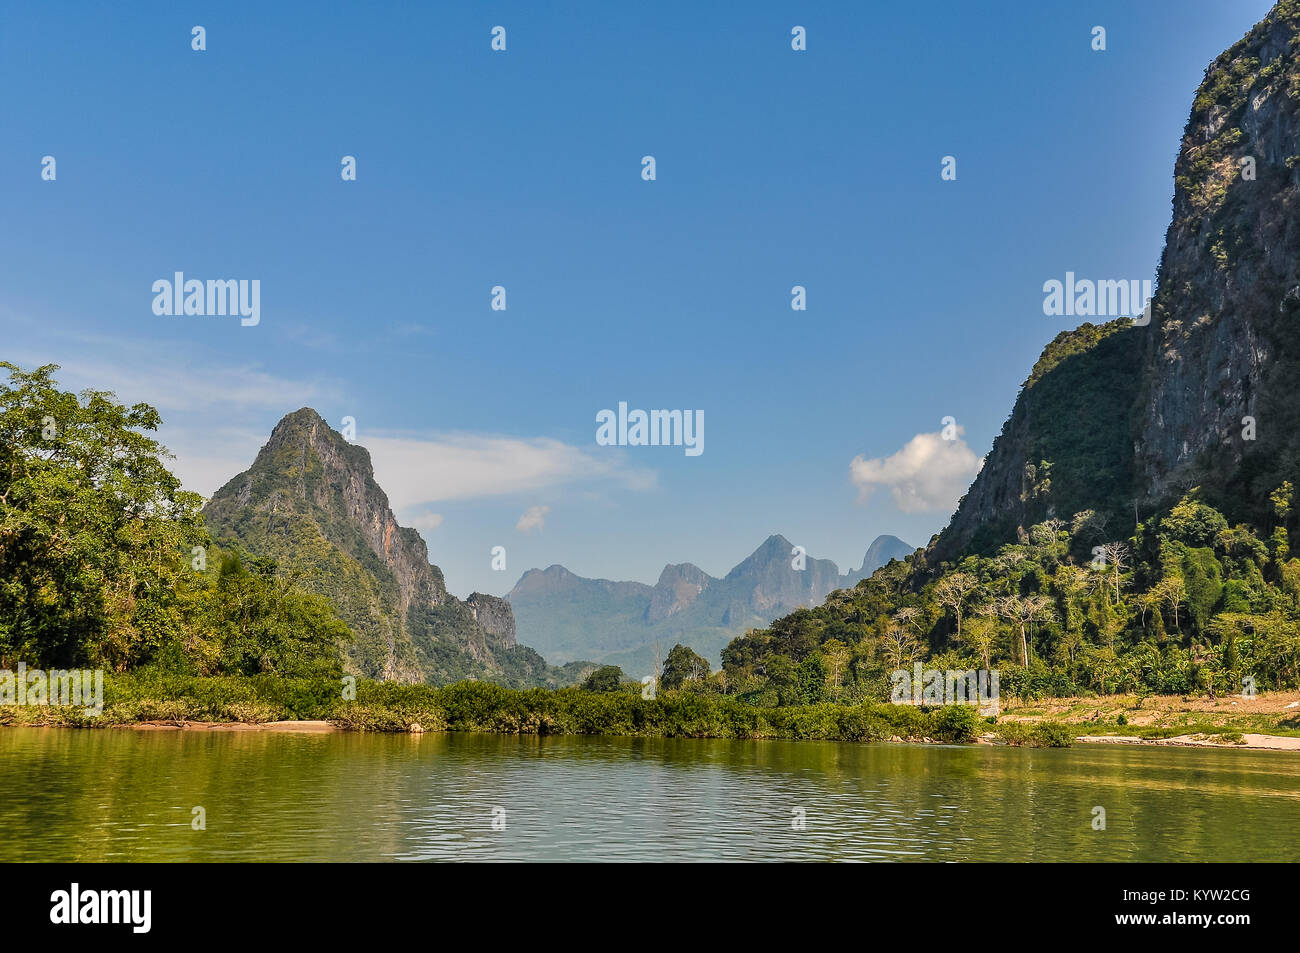 Riverside landscape on the Mekong river in Northern Laos Stock Photo